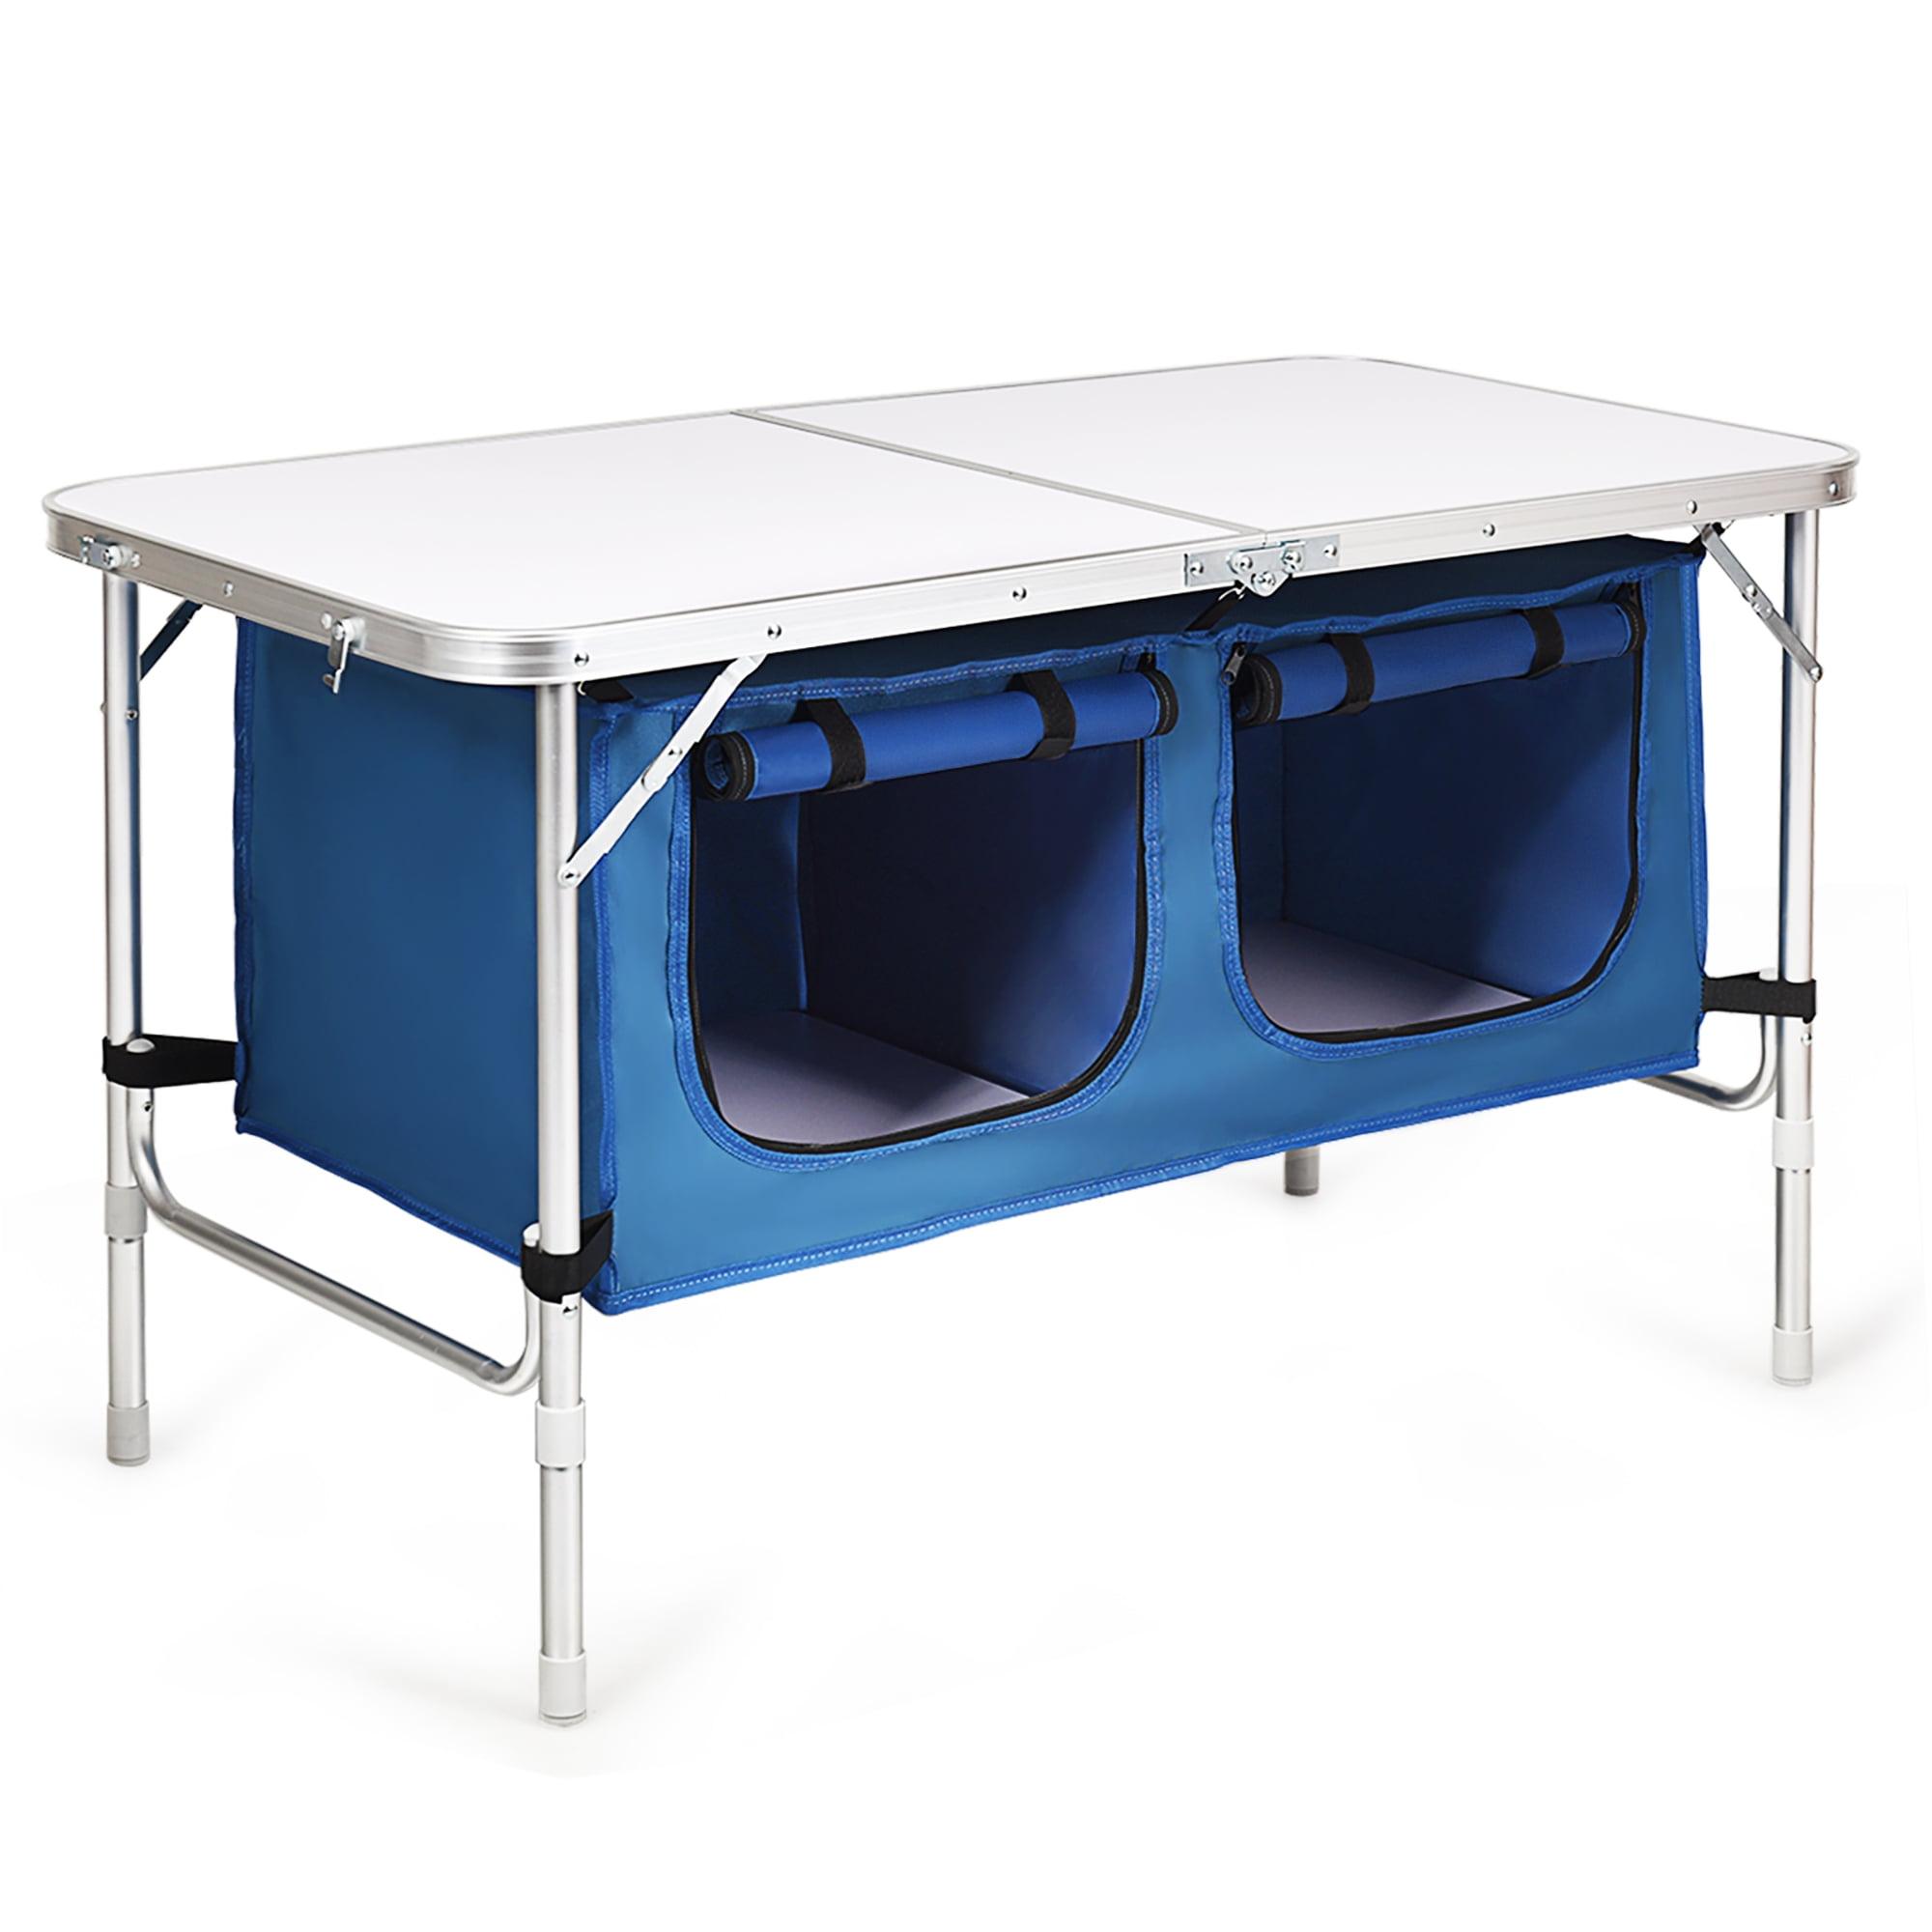 Portable Dark Blue Aluminum Camping Table with Storage Organizer